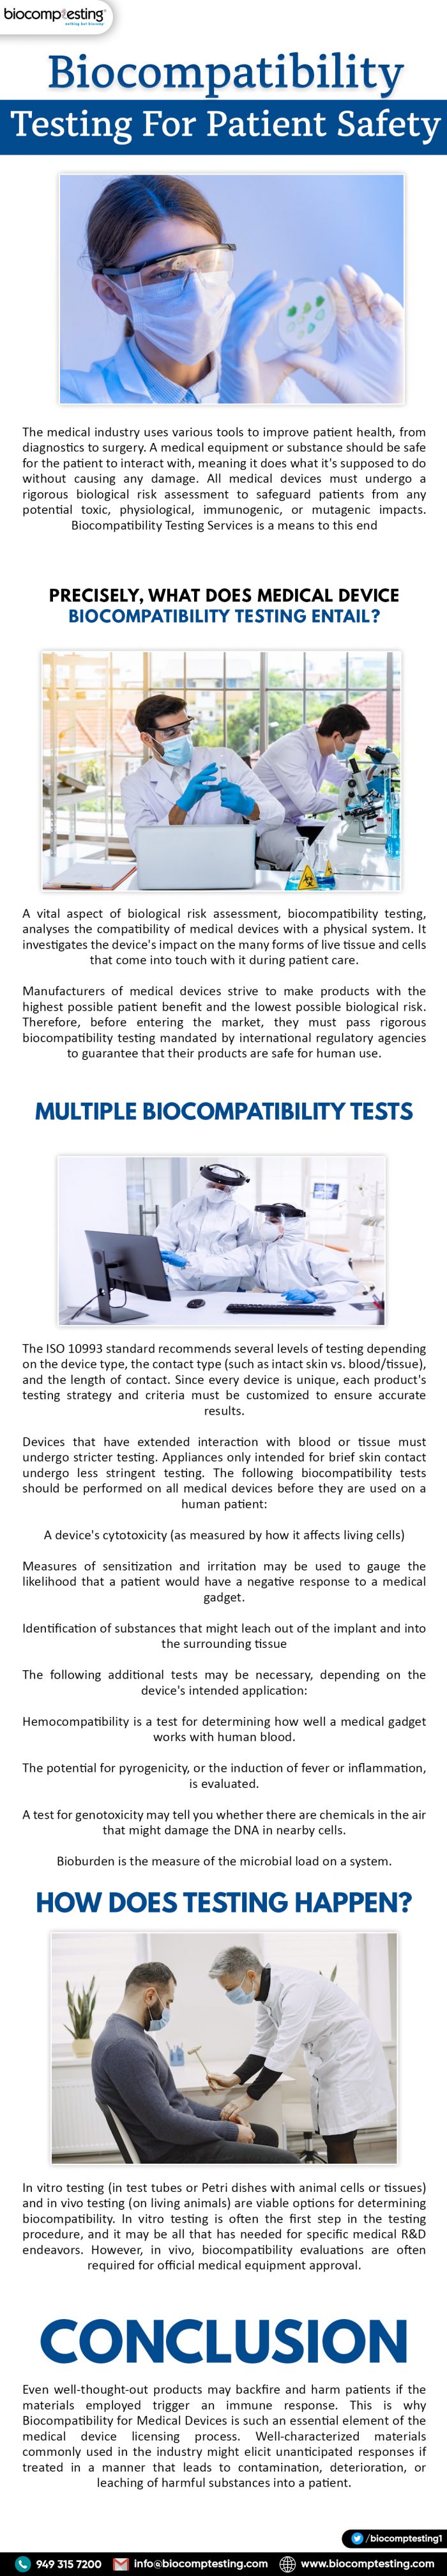 Biocompatibility Testing For Patient Safety